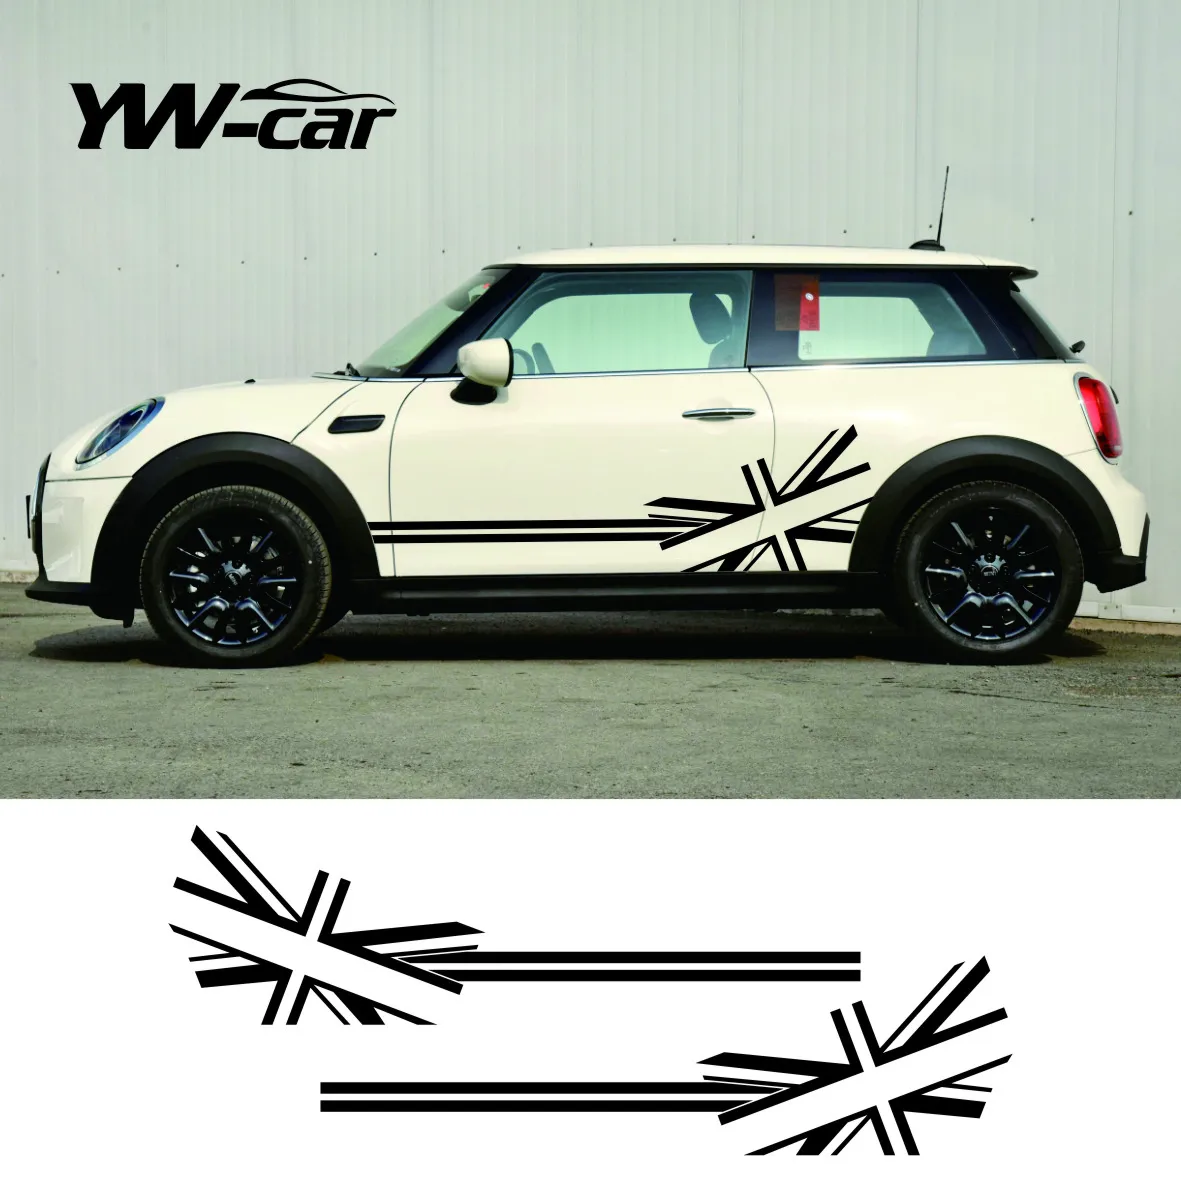 

2pcs Union Jack Flag Side Stripes Door Side Decal Stickers for BMW MINI Cooper S Countryman R60 F60 F55 F56 R56 Paceman R61 R50